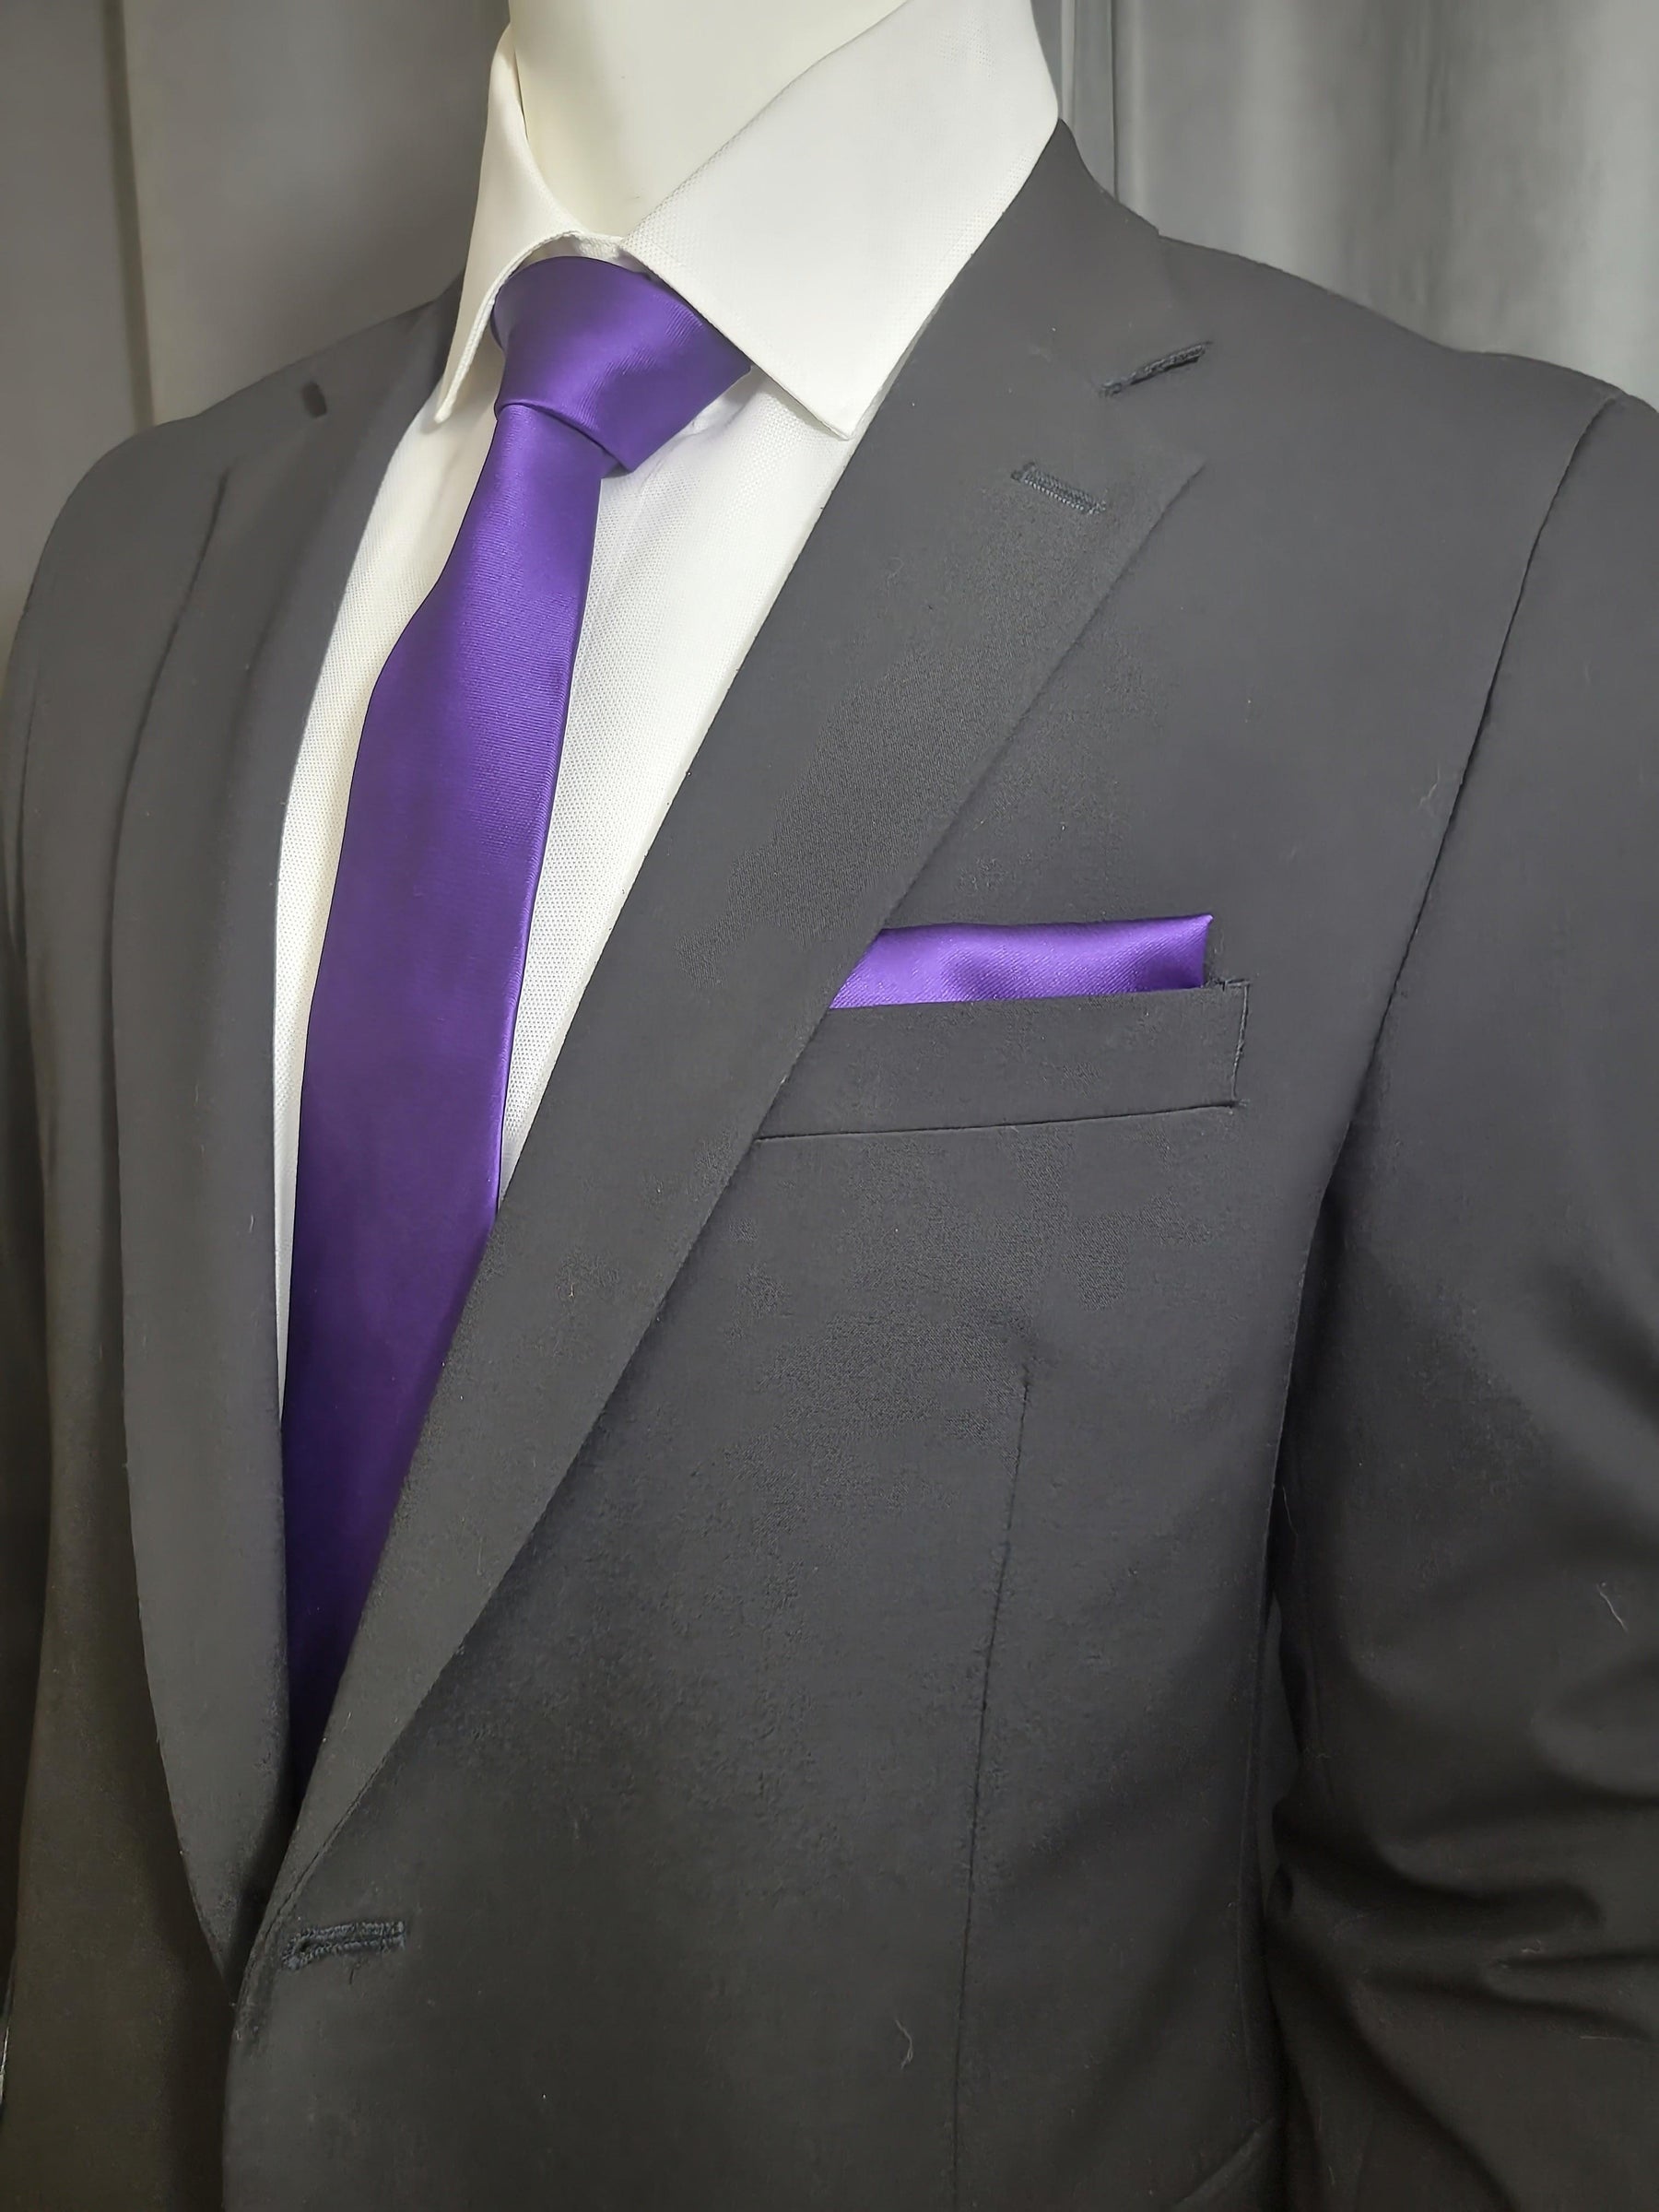 Royal Purple Necktie and Pocket Square - The Upscale Banker